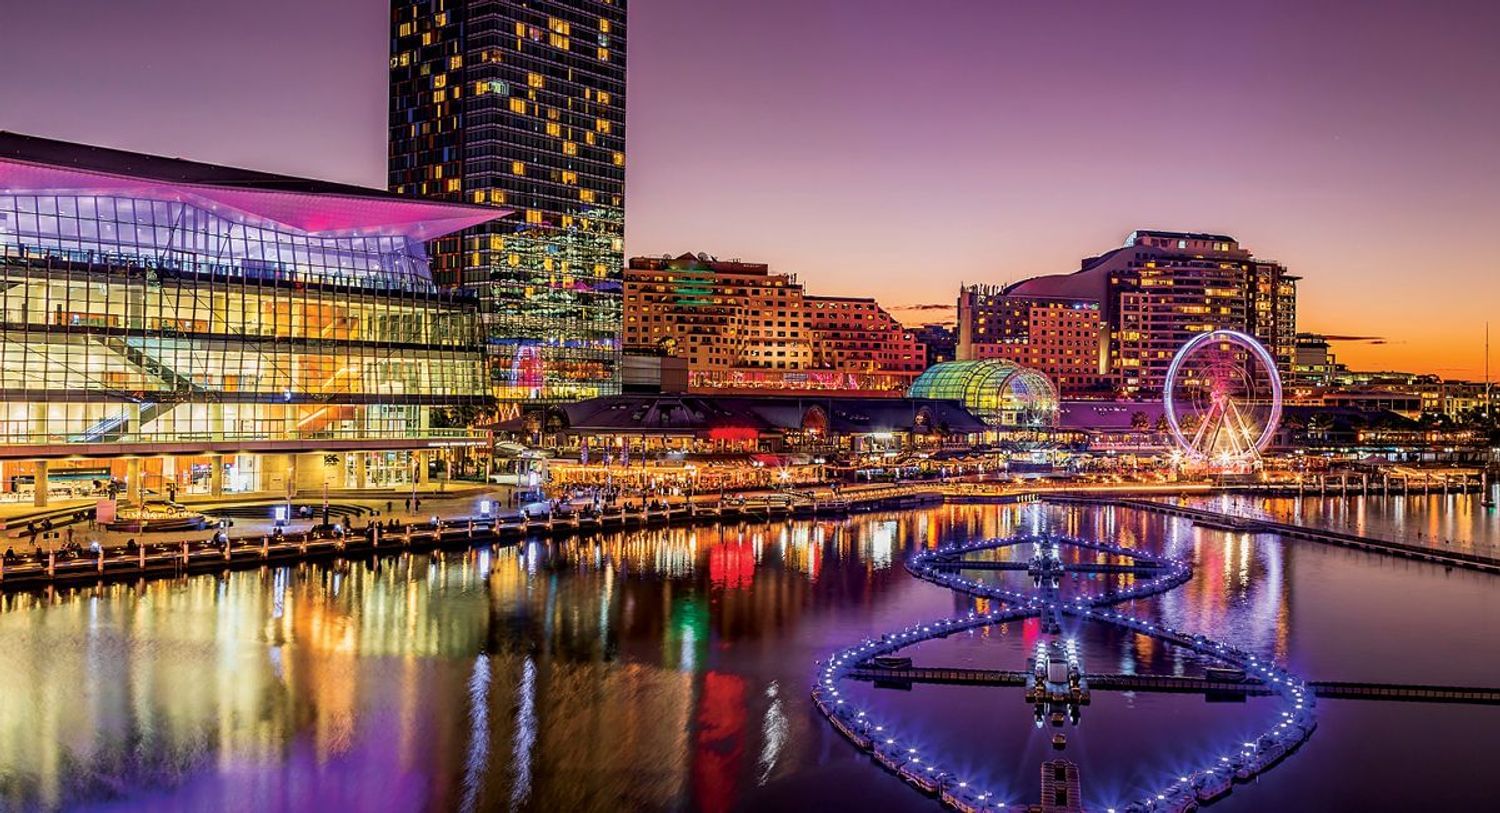 The ICC lit in multi-coloured lights in the wider Darling Harbour landscape